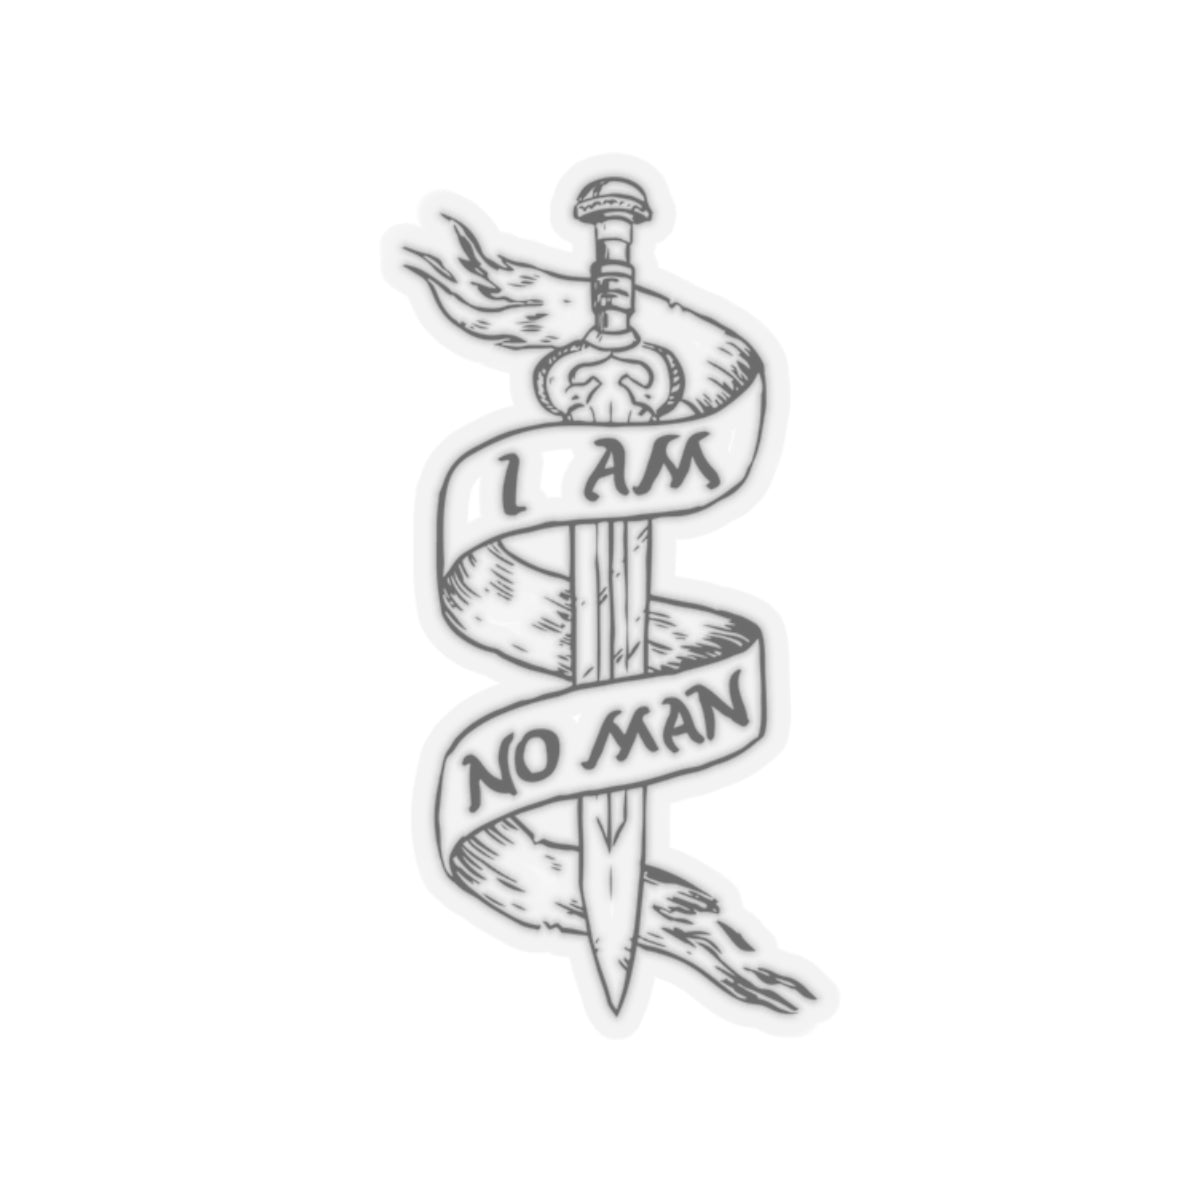 I Am No Man Sticker - Lord of the Rings